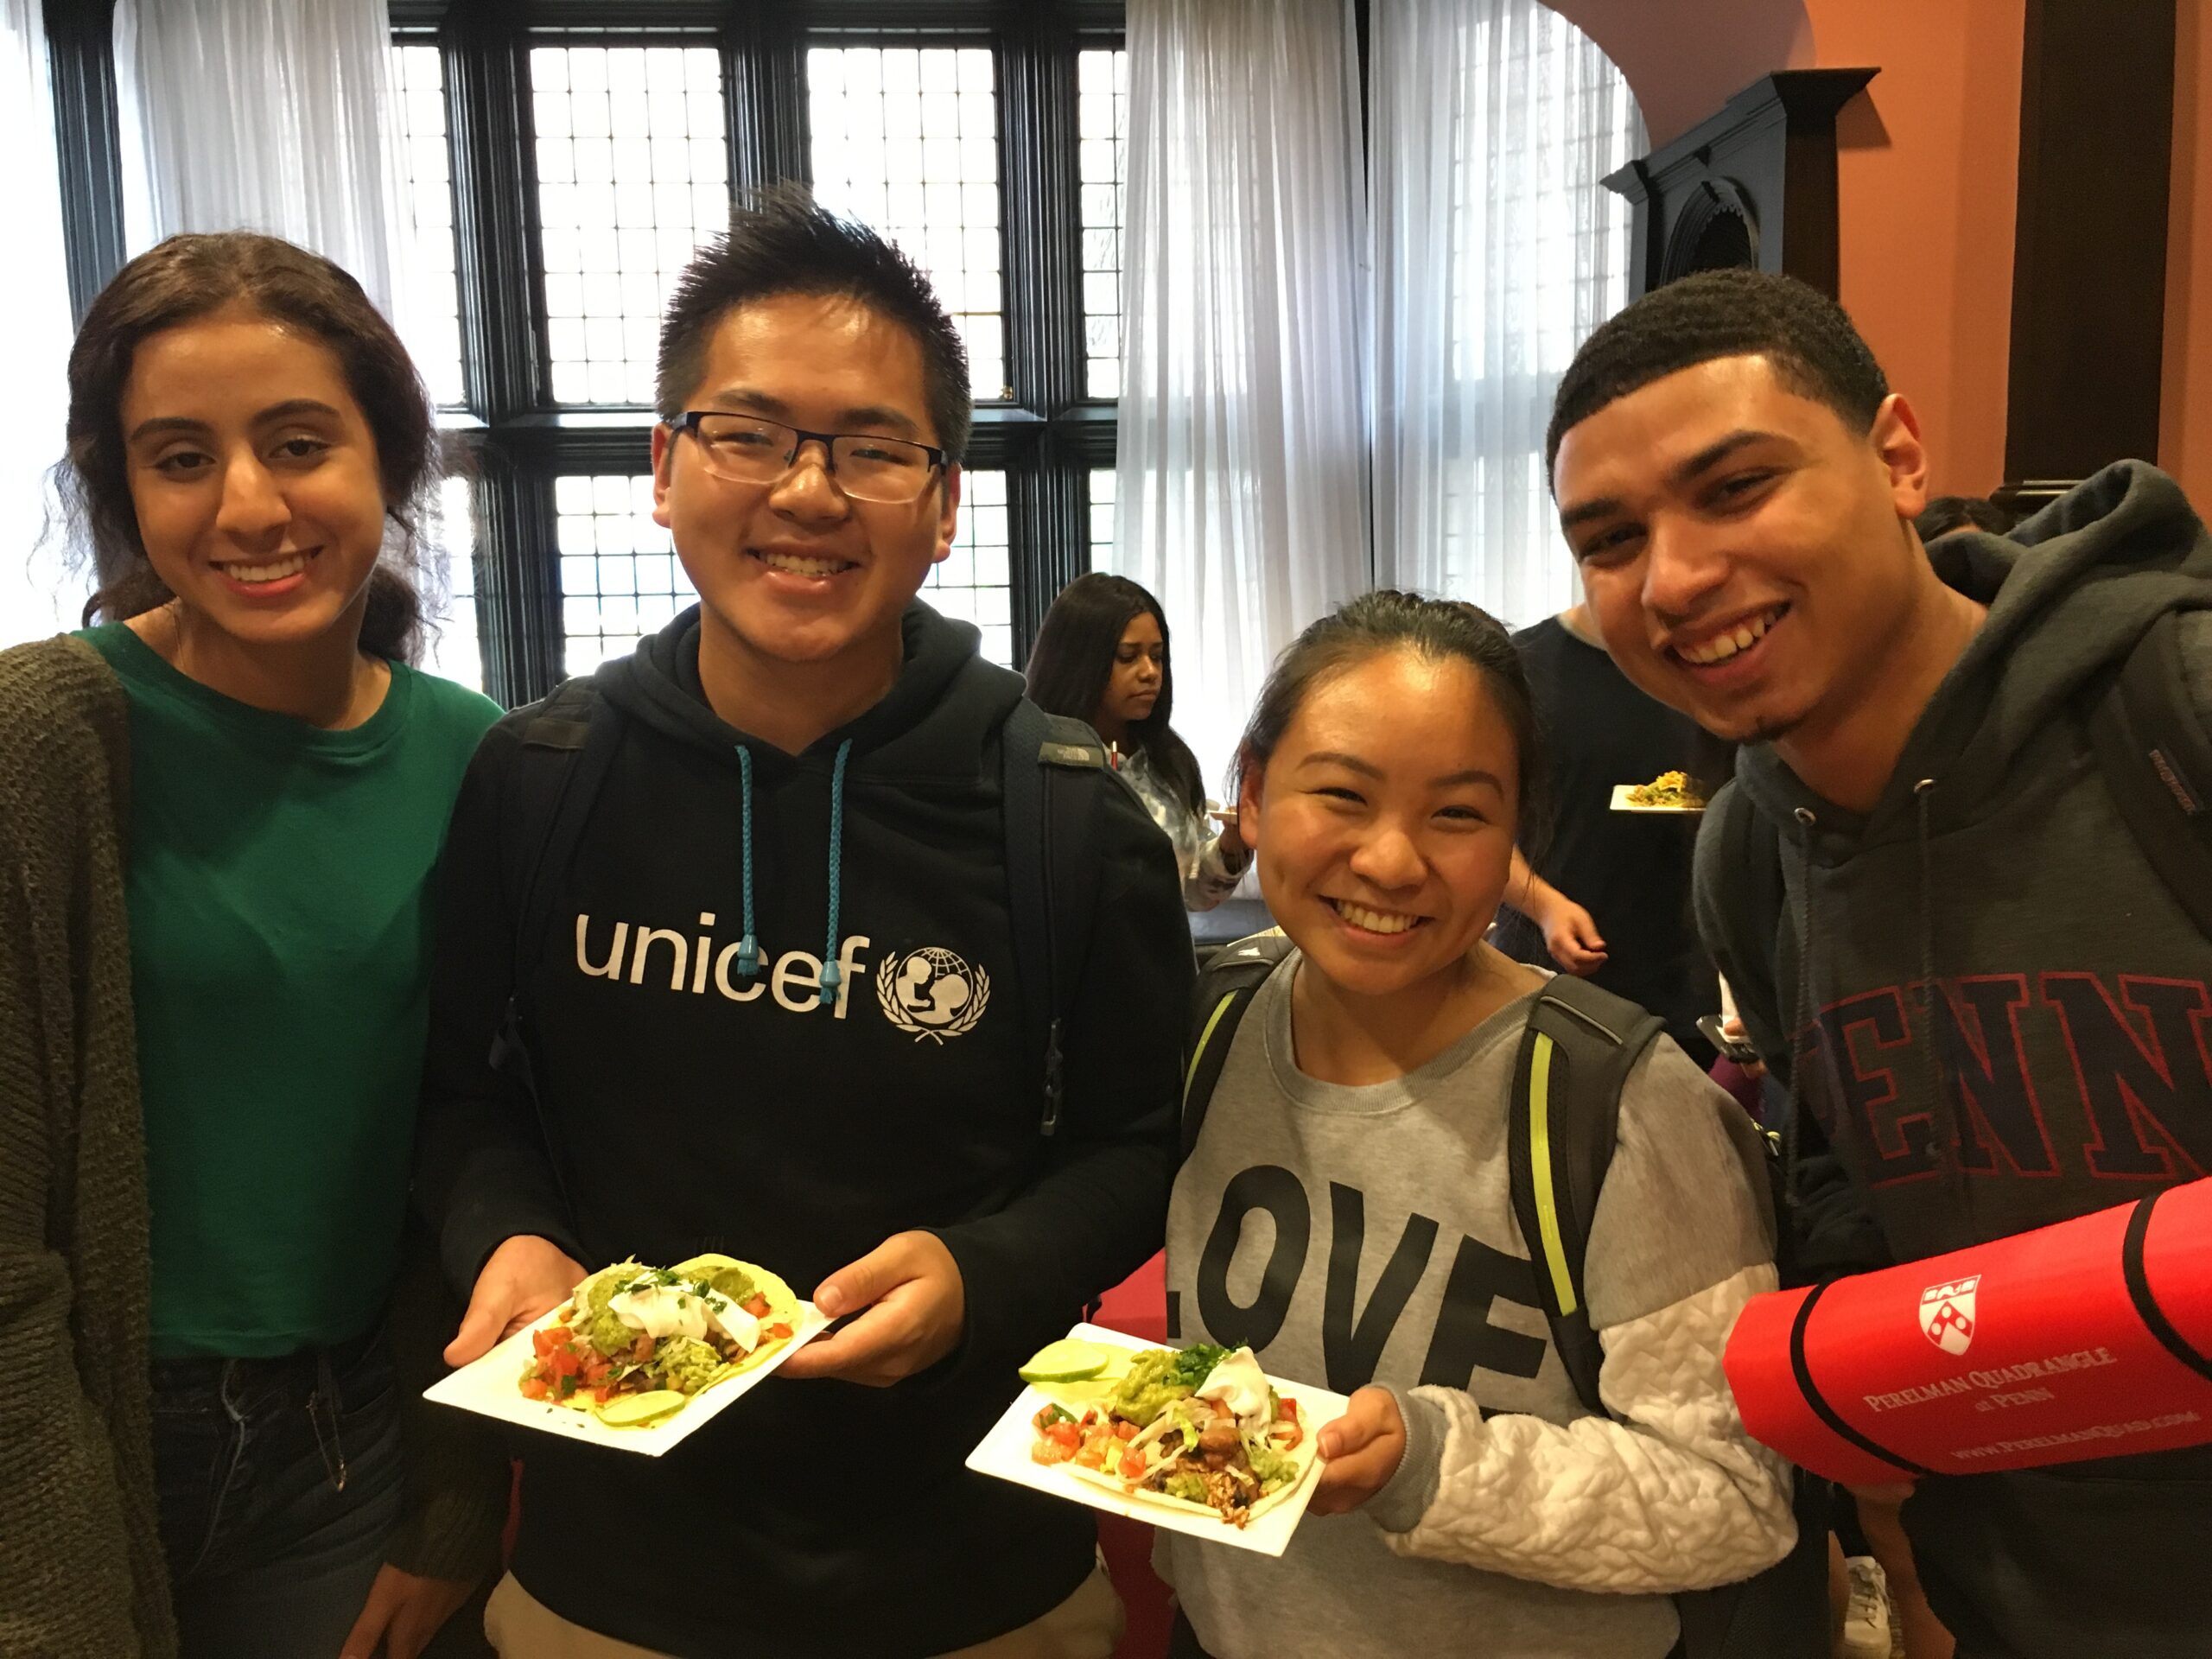 Four Penn Students pose with the food samples given out so they can try the new food at the Houston Market